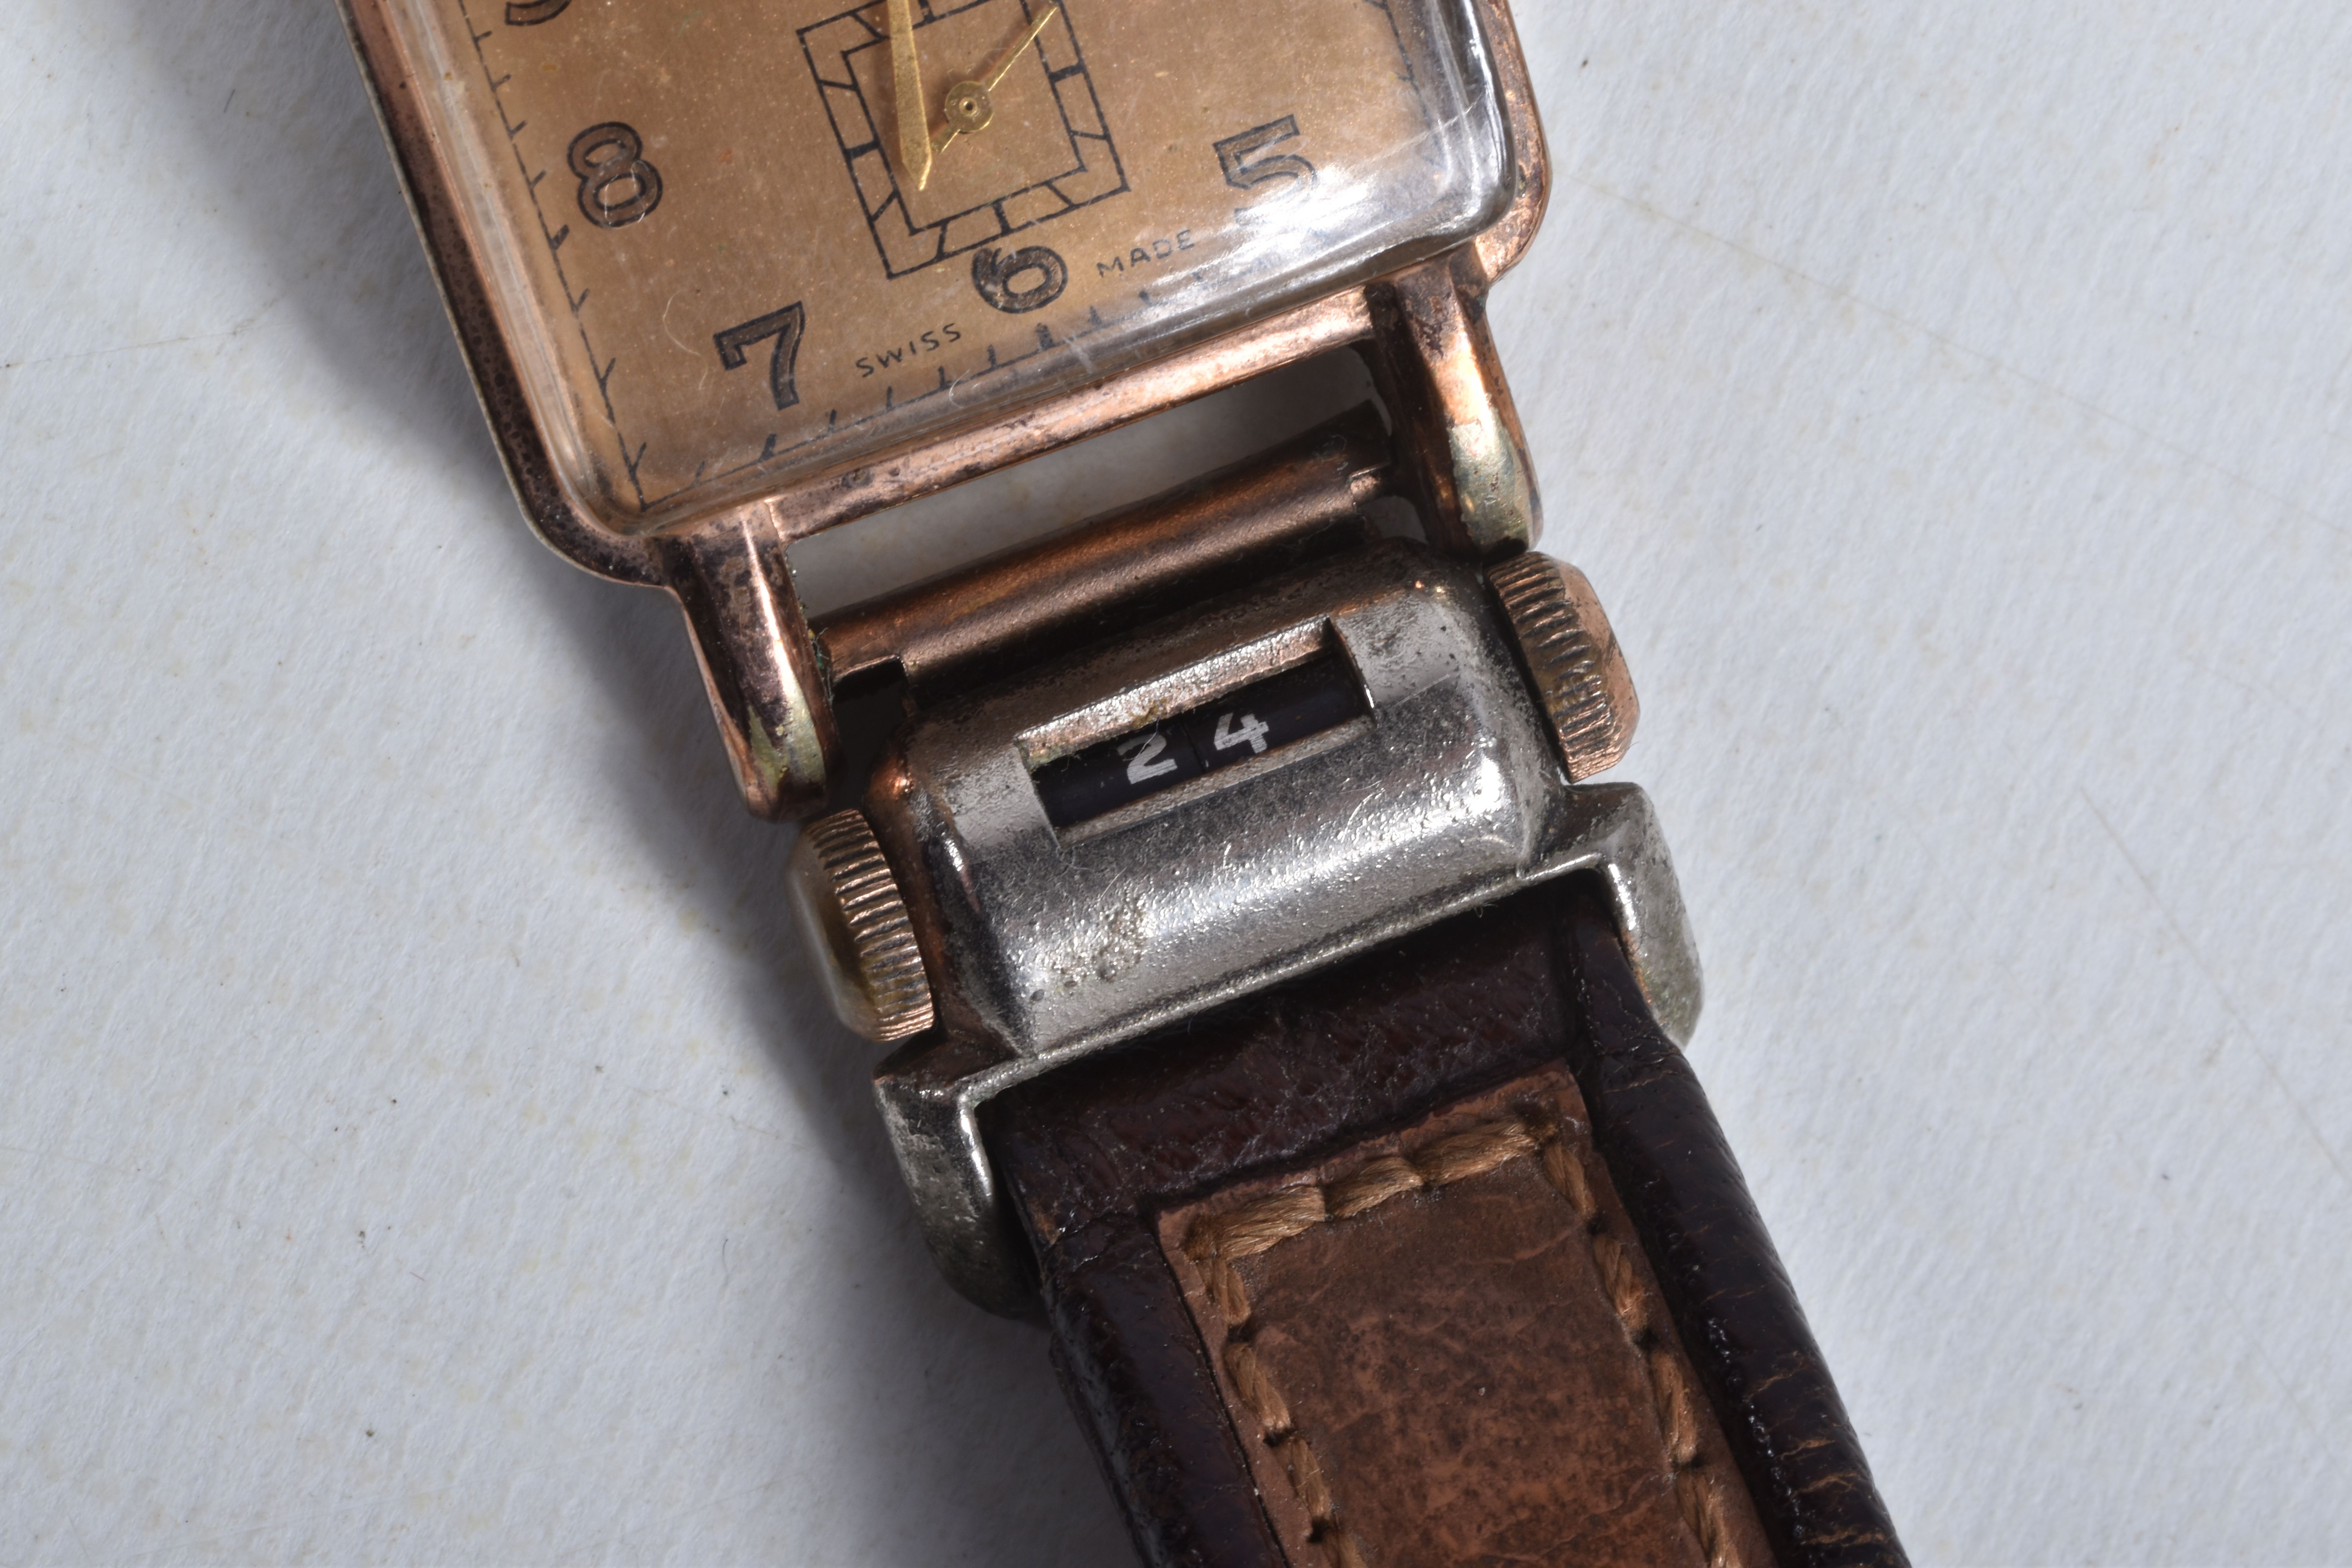 A GENTS 'ALADIN' WRISTWATCH, manual wind, rectangular gold tone dial signed 'Aladin', Arabic - Image 5 of 9